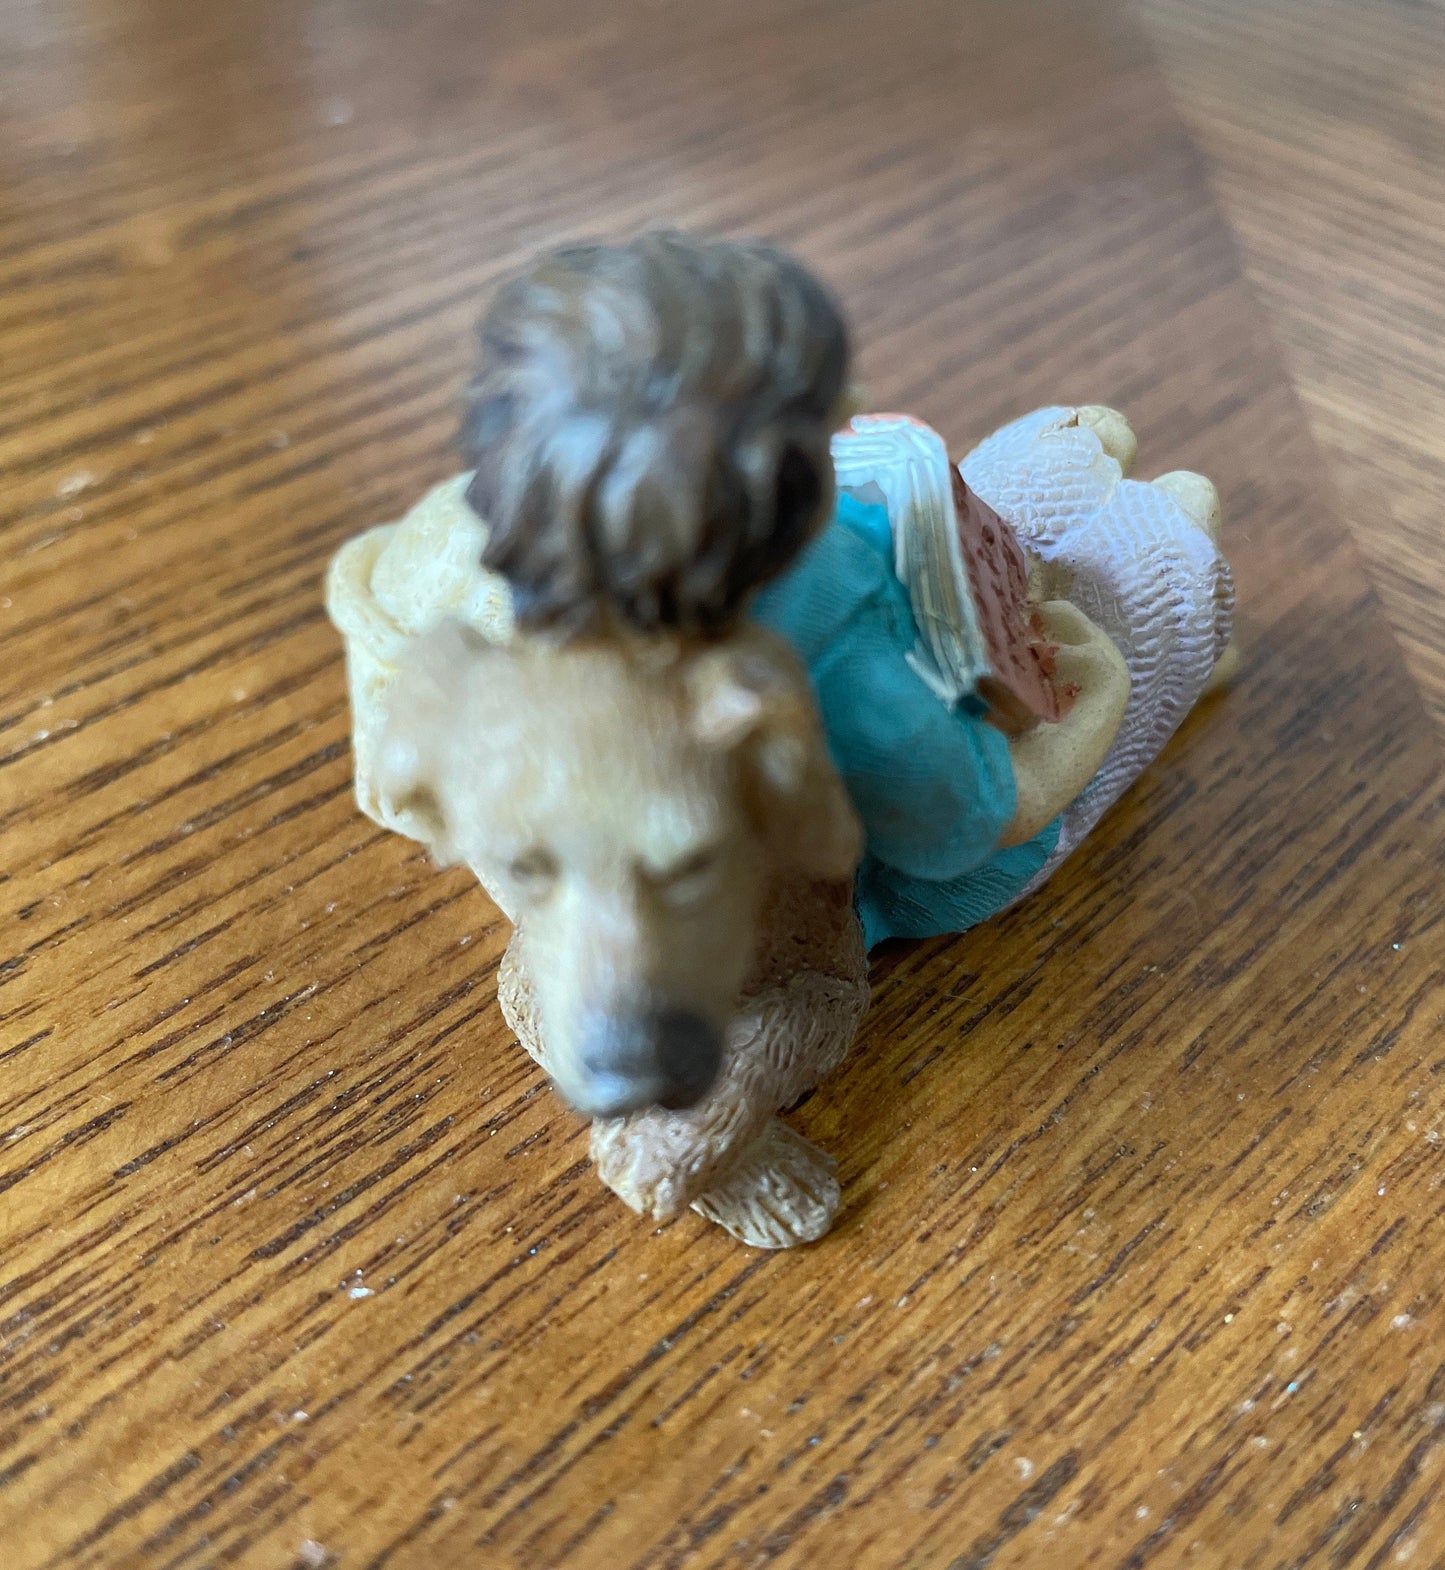 Fairy boy figurine relaxing with his dog while reading a book